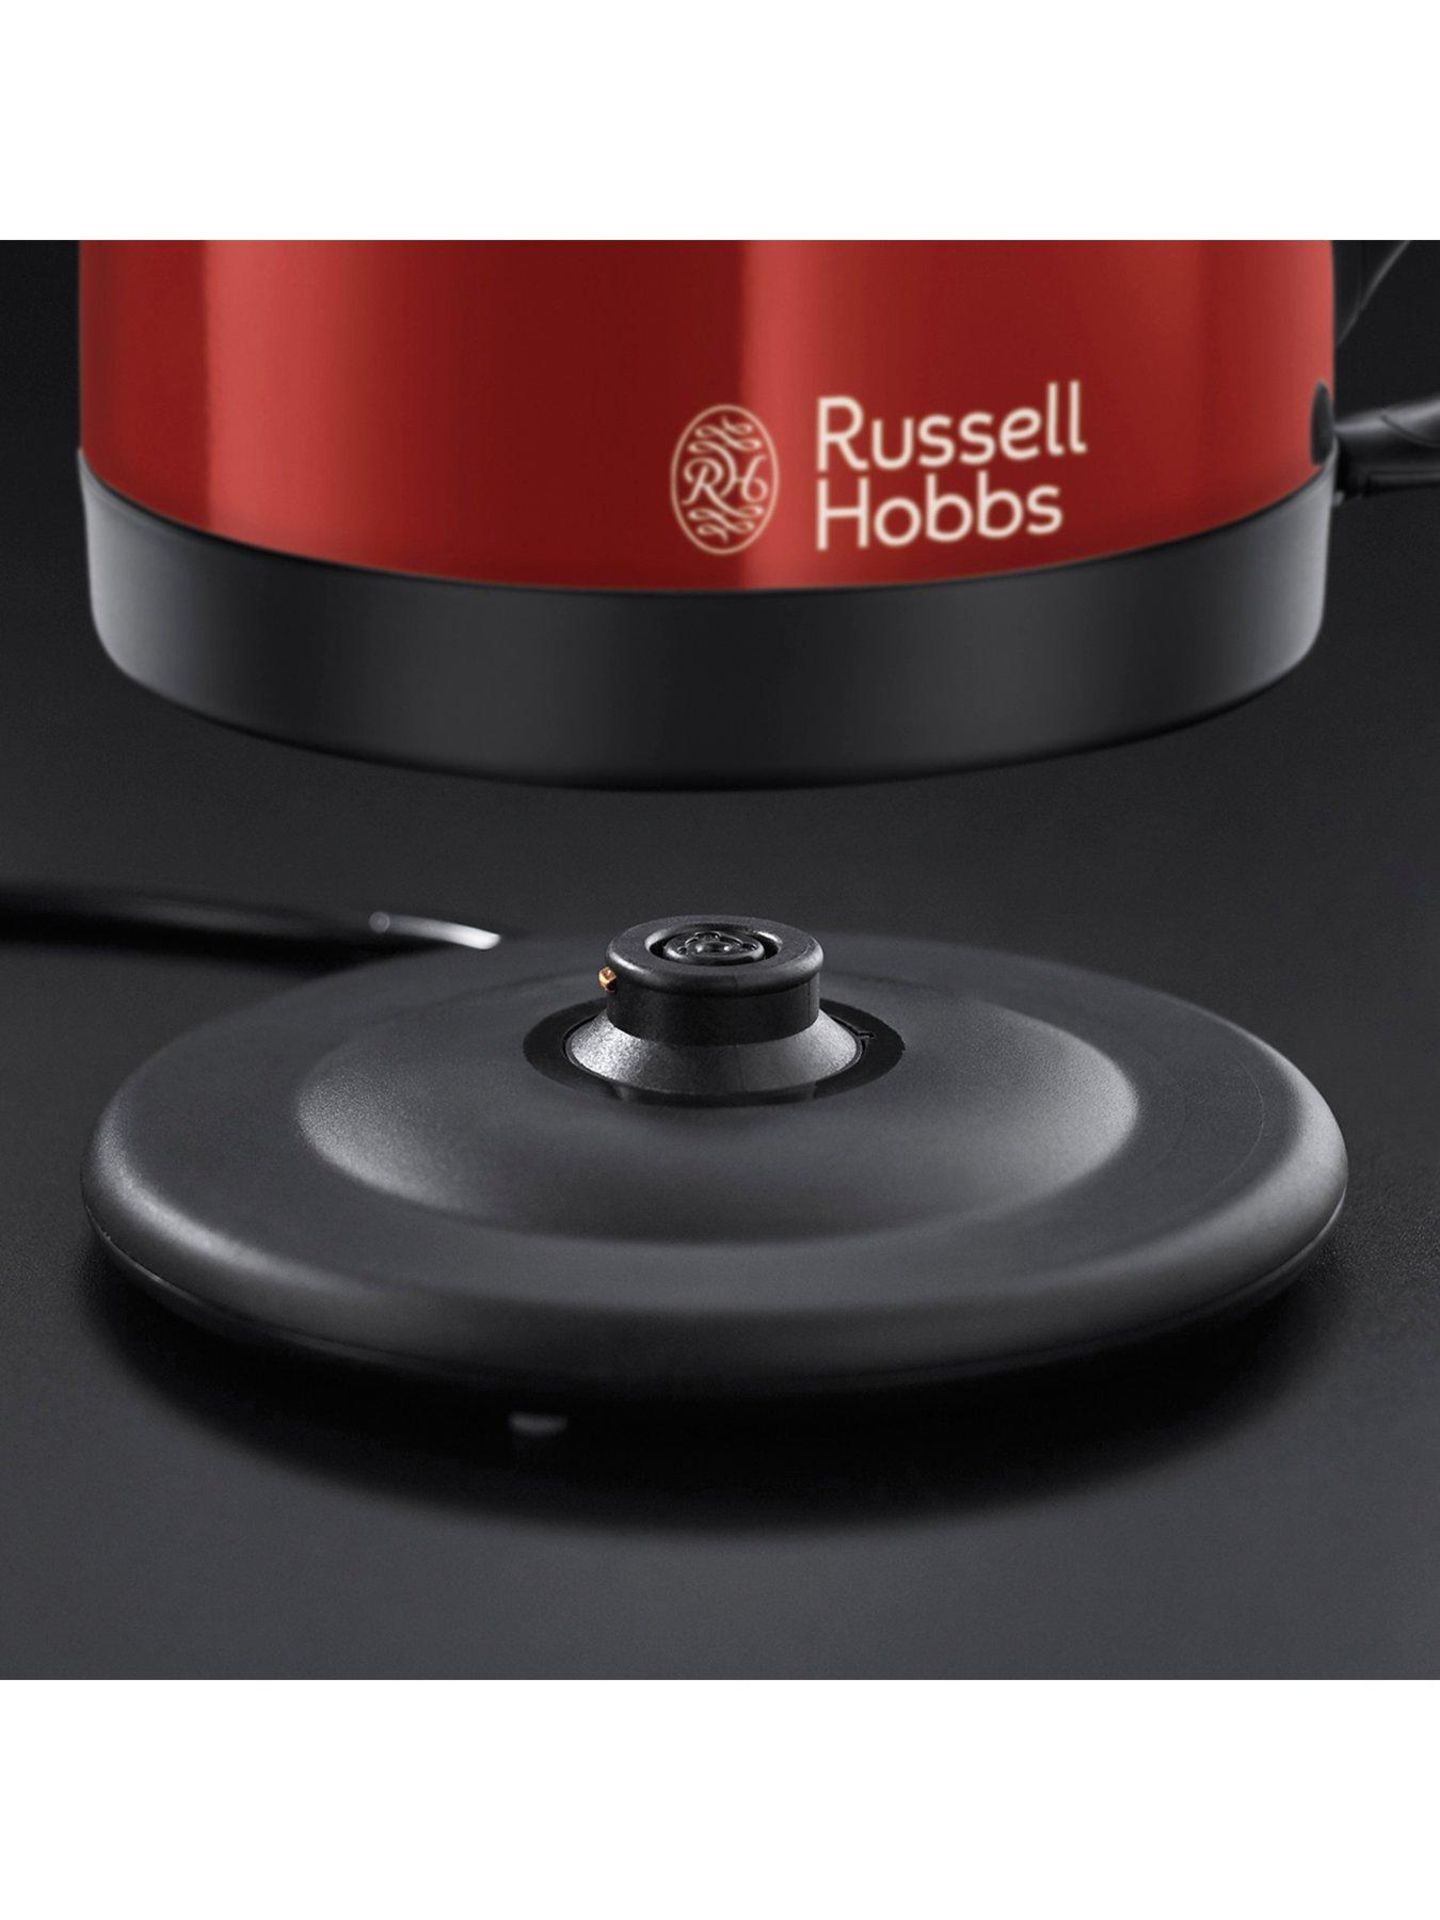 V Brand New Russel Hobbs Red Dorchester Kettle - Perfect Pour - Saves Up To 70% Energy - Littlewoods - Image 2 of 4